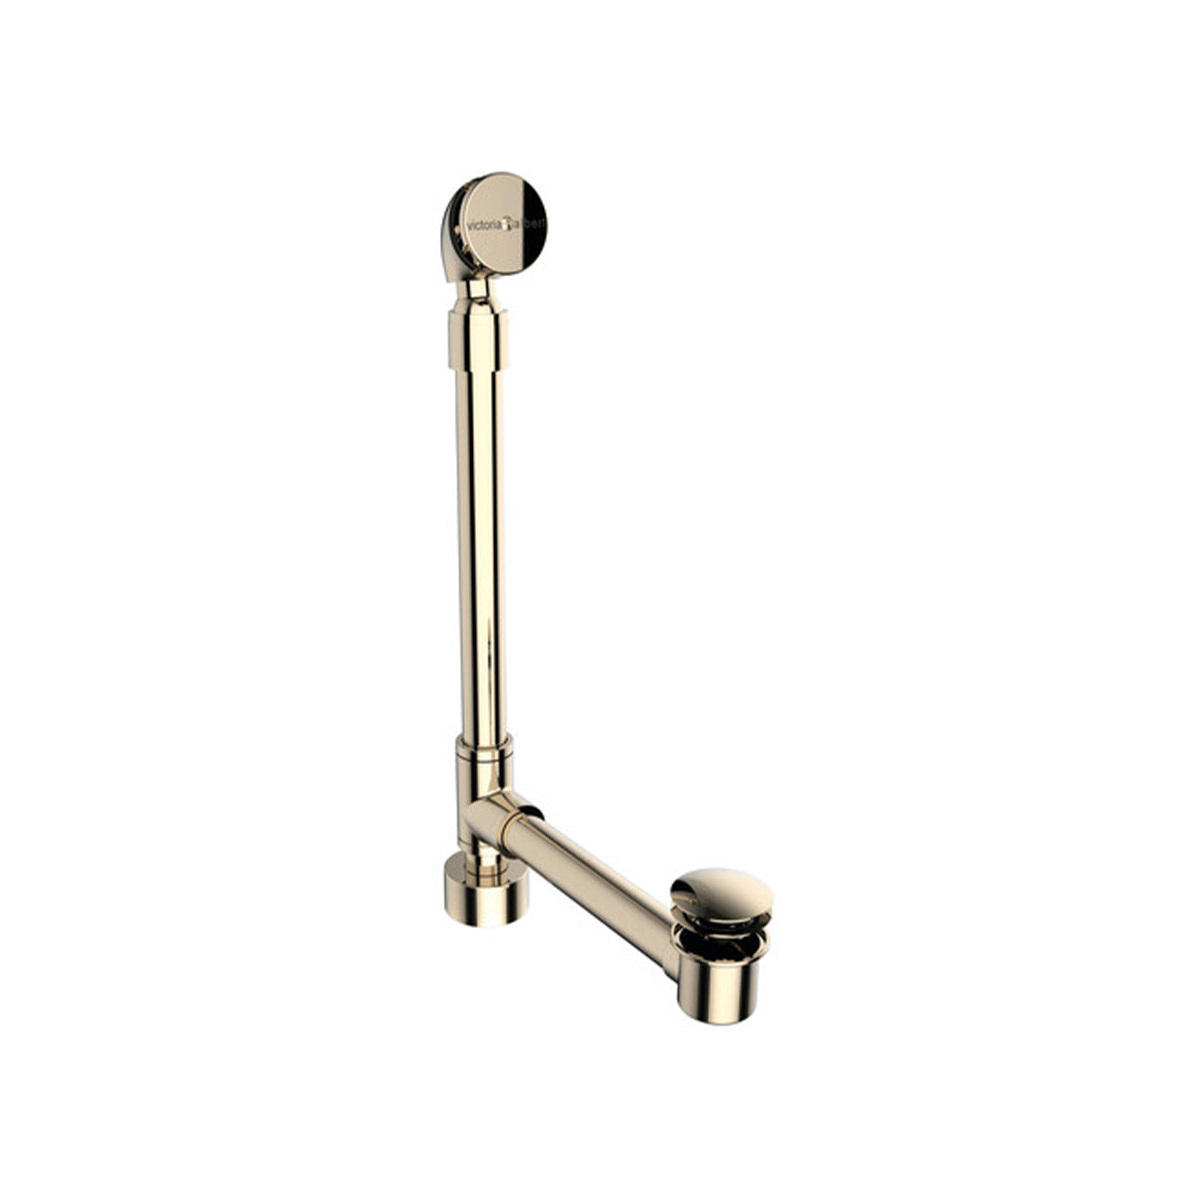 Victoria + Albert Kit 50 exposed bath waste with overflow in Polished Nickel. Imported and distributed in Australia by Luxe by Design, Brisbane.